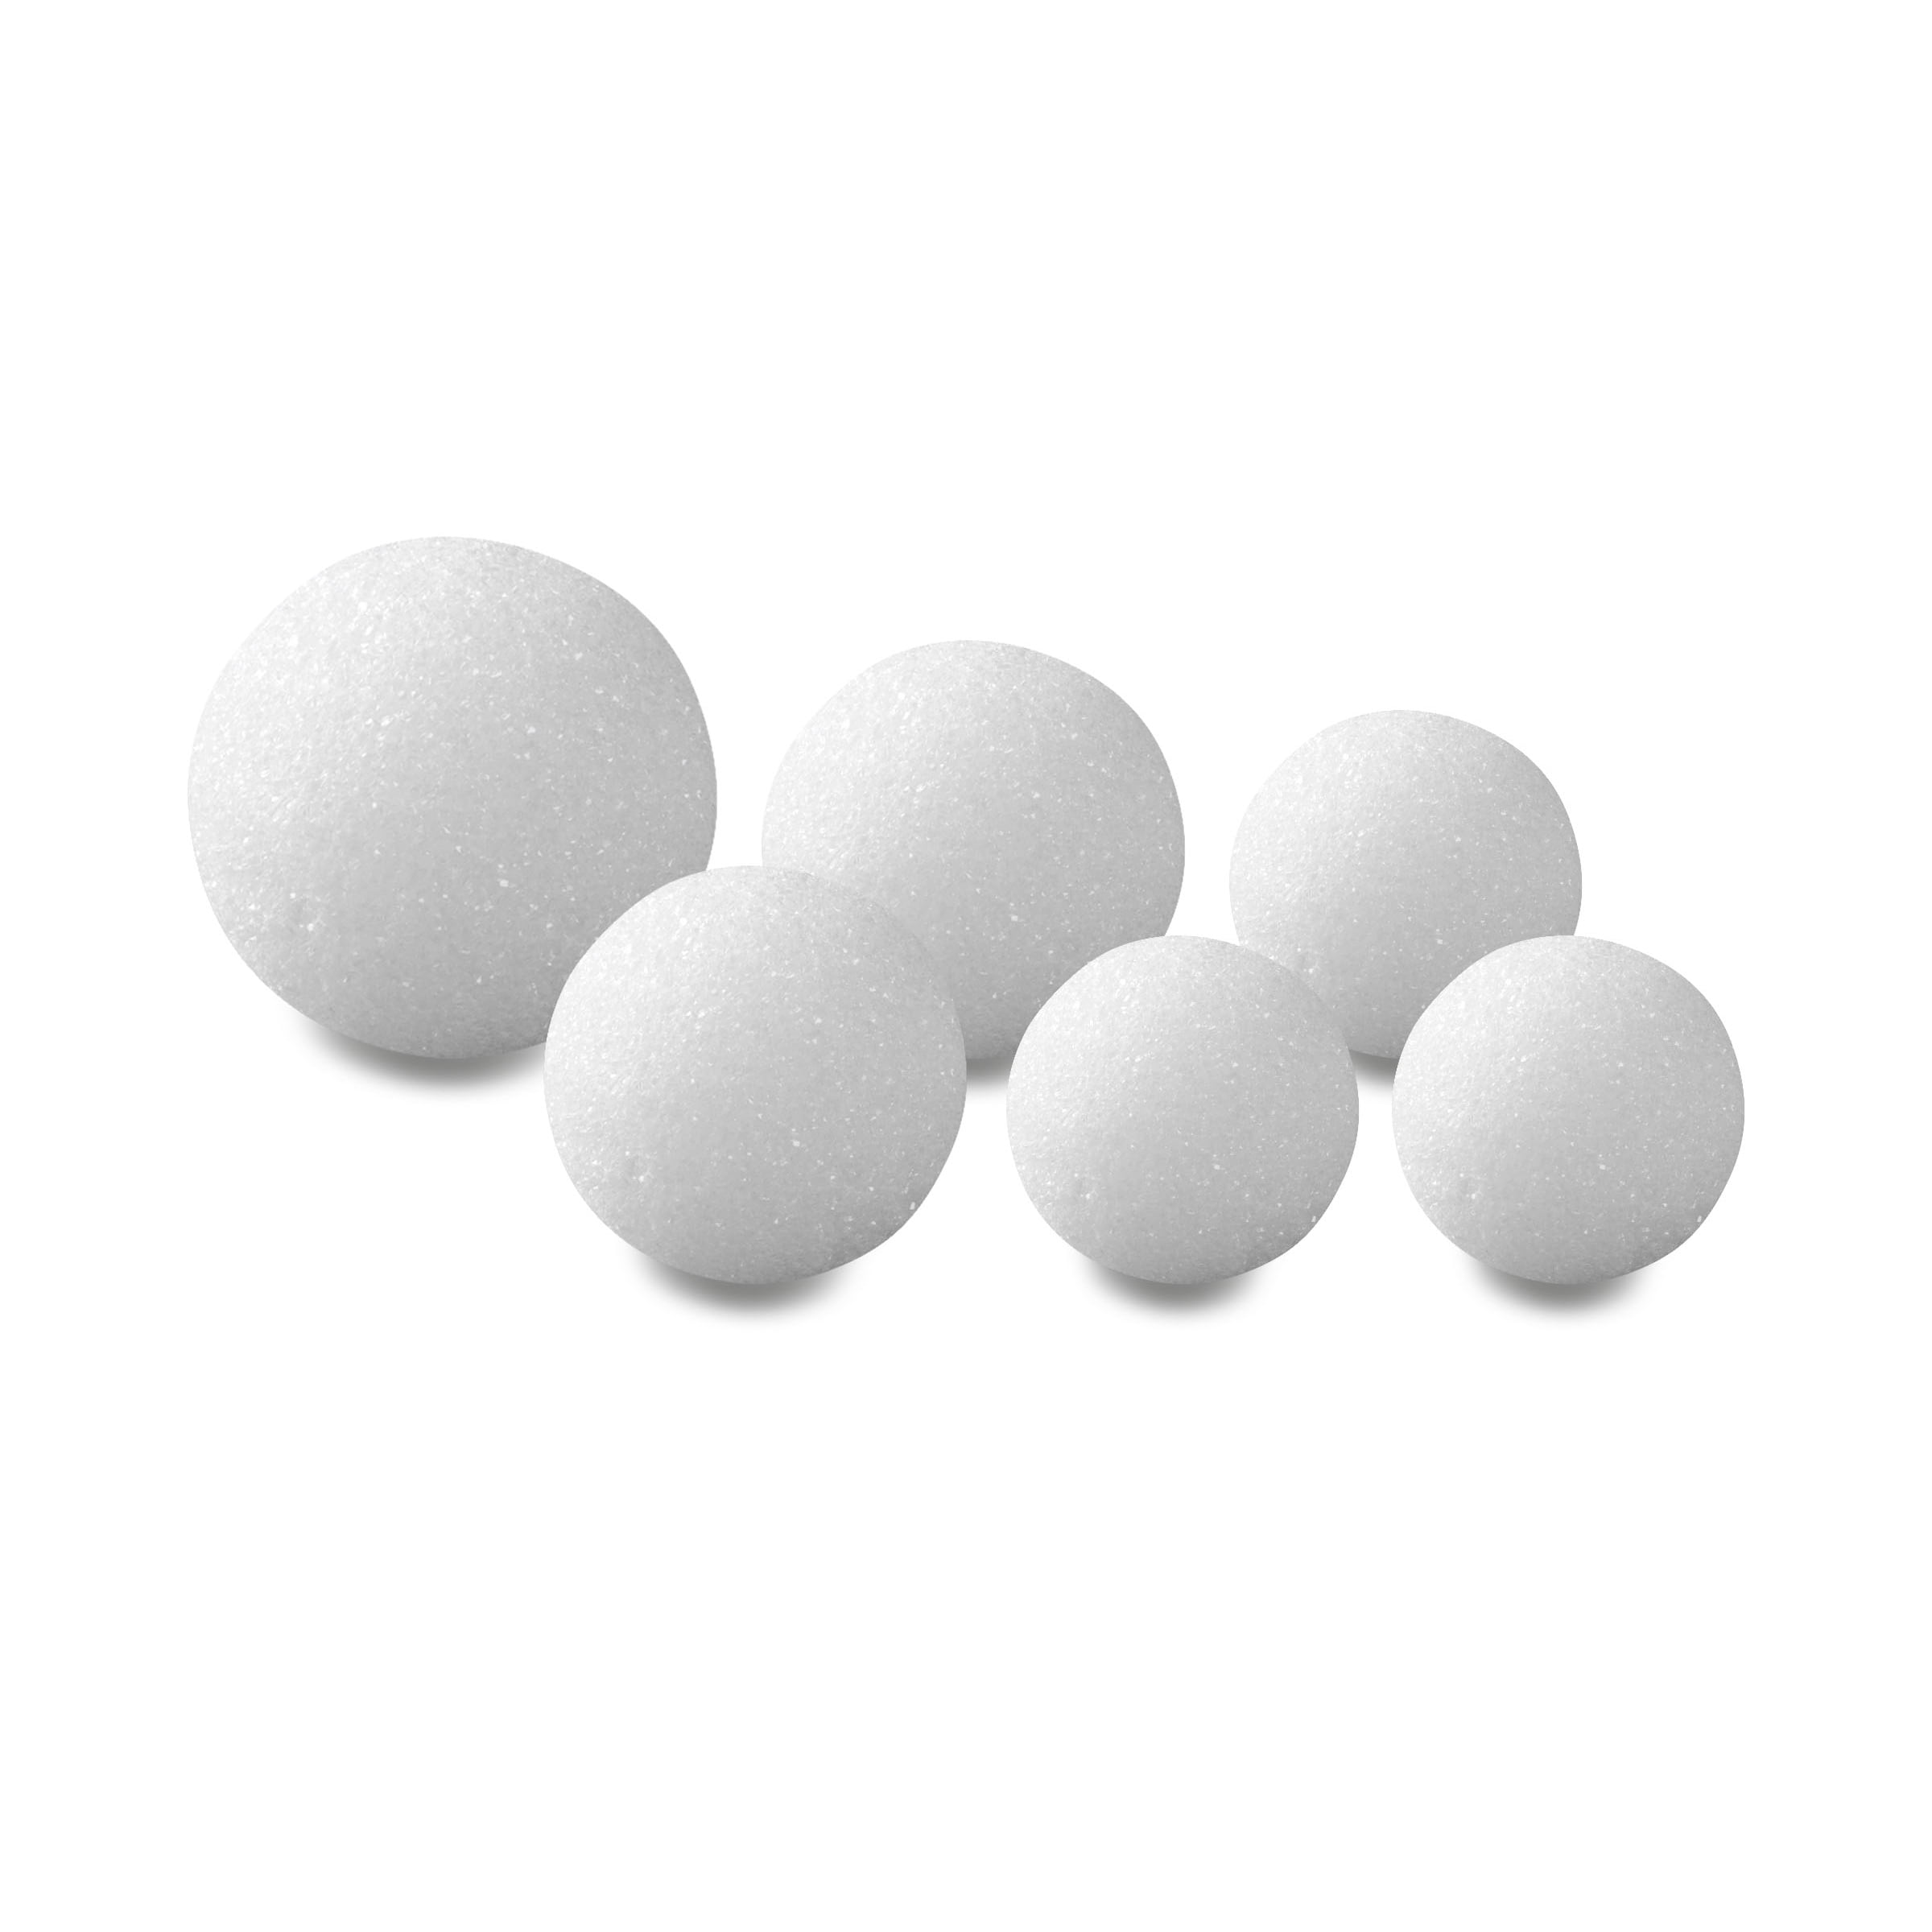  8PC 4 Inch White Foam Balls Polystyrene Craft Balls Foam Balls  for Art, Craft, Household, School Projects and Christmas Party Decorations  : Arts, Crafts & Sewing